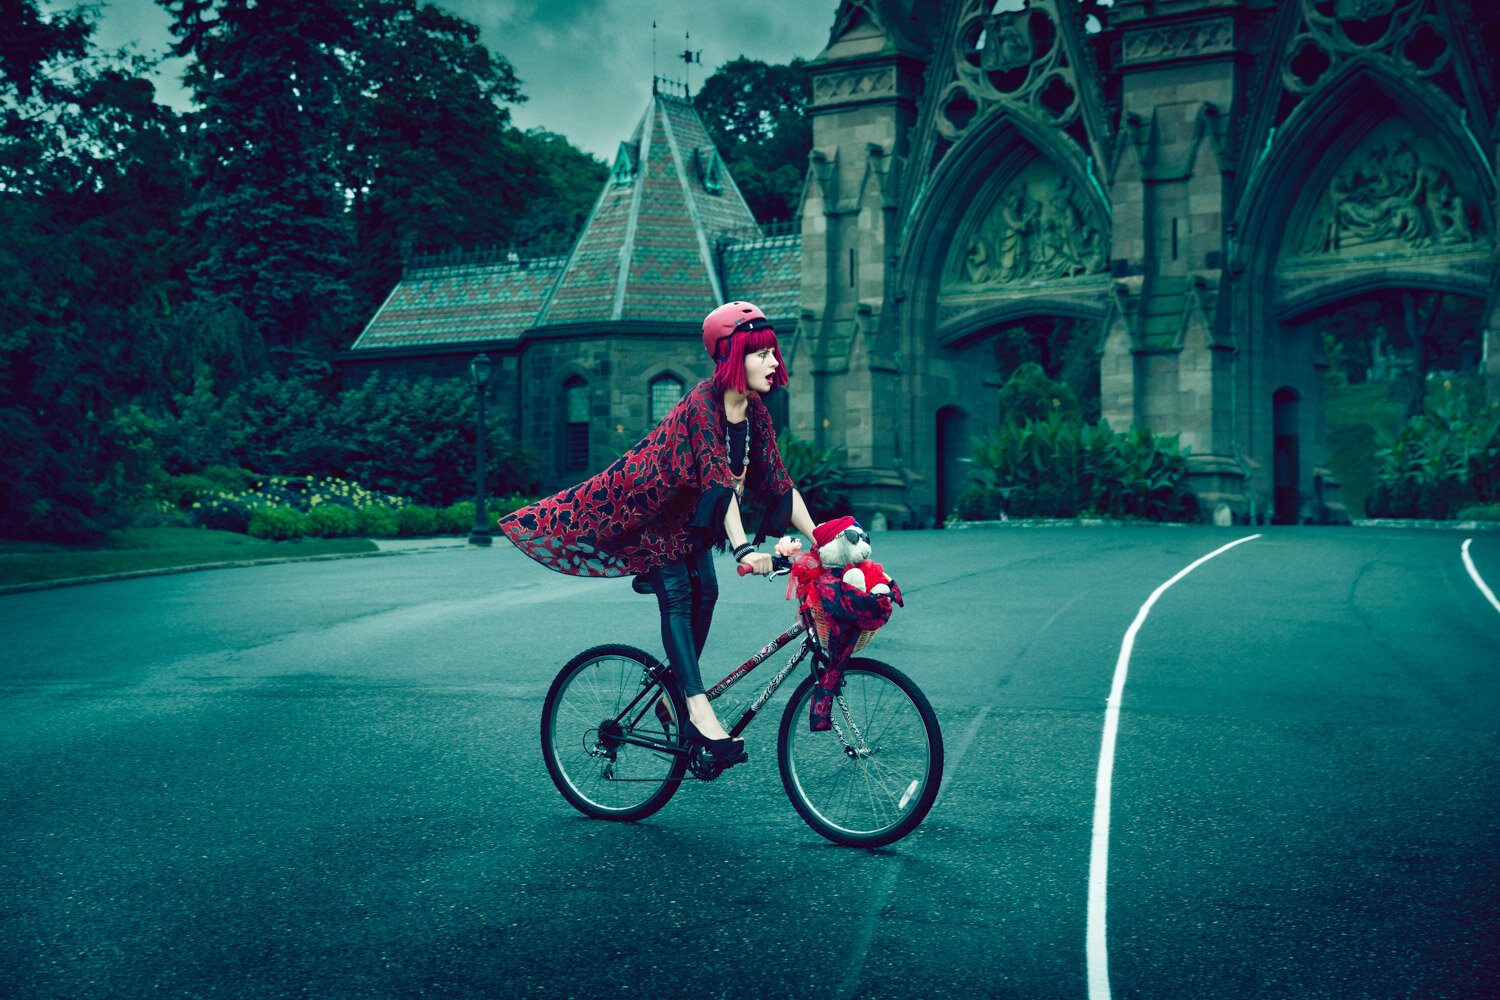 whimsical portrait of entertainer Michelle Joni wearing red and biking with teddy bear by artistic portrait photographer Hanna Agar